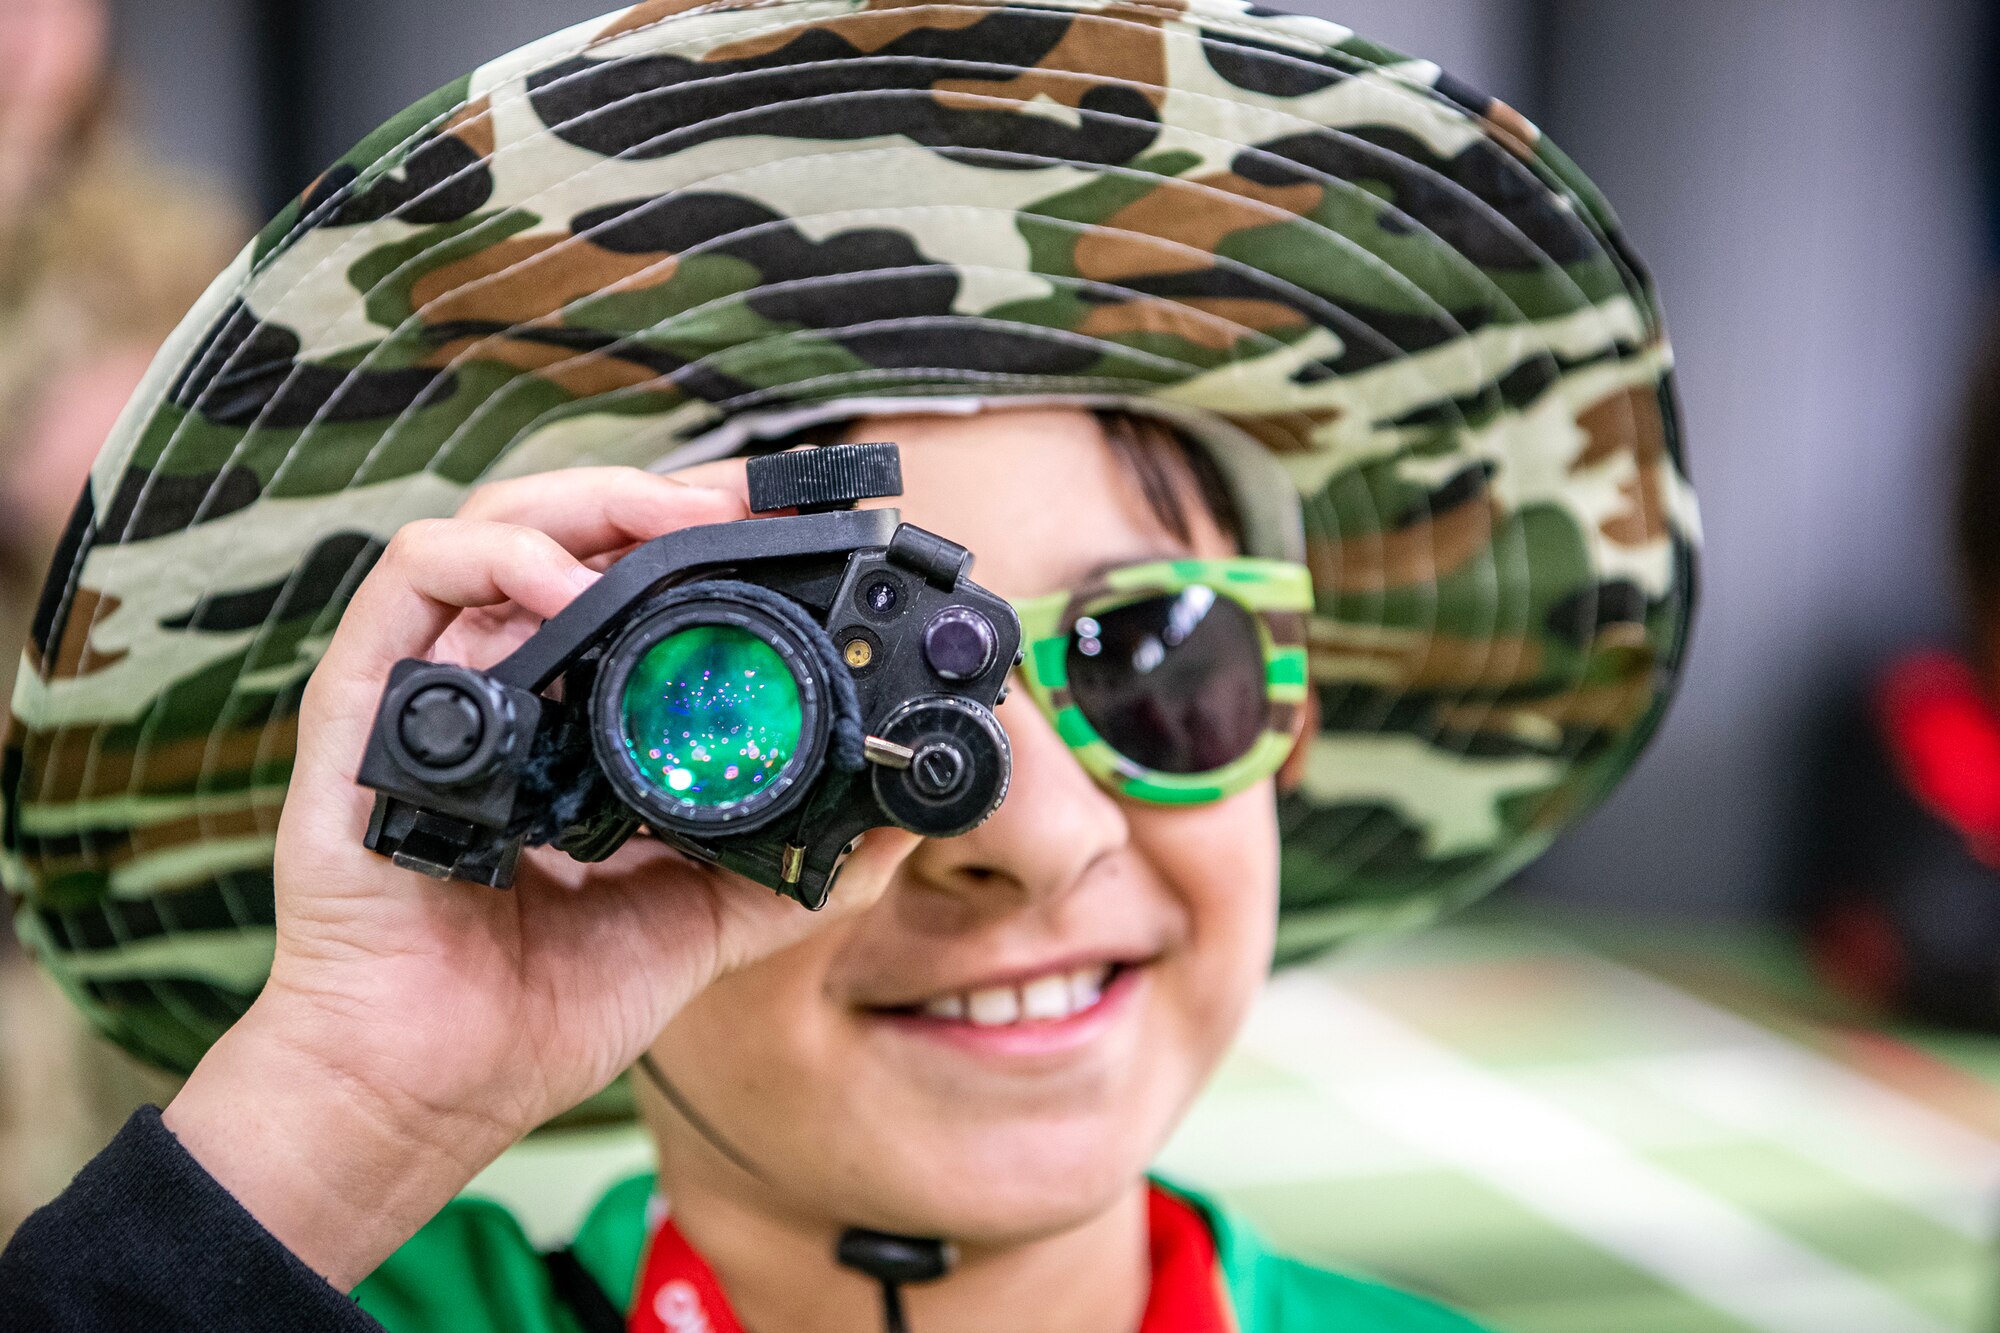 An Alconbury elementary school student looks through a rangefinder during Camp Kudos at RAF Alconbury, England, April 14, 2023. The camp gave students the opportunity to experience and learn about various aspects of deployment preparation and the wing mission. (U.S. Air Force photo by Staff Sgt. Eugene Oliver)